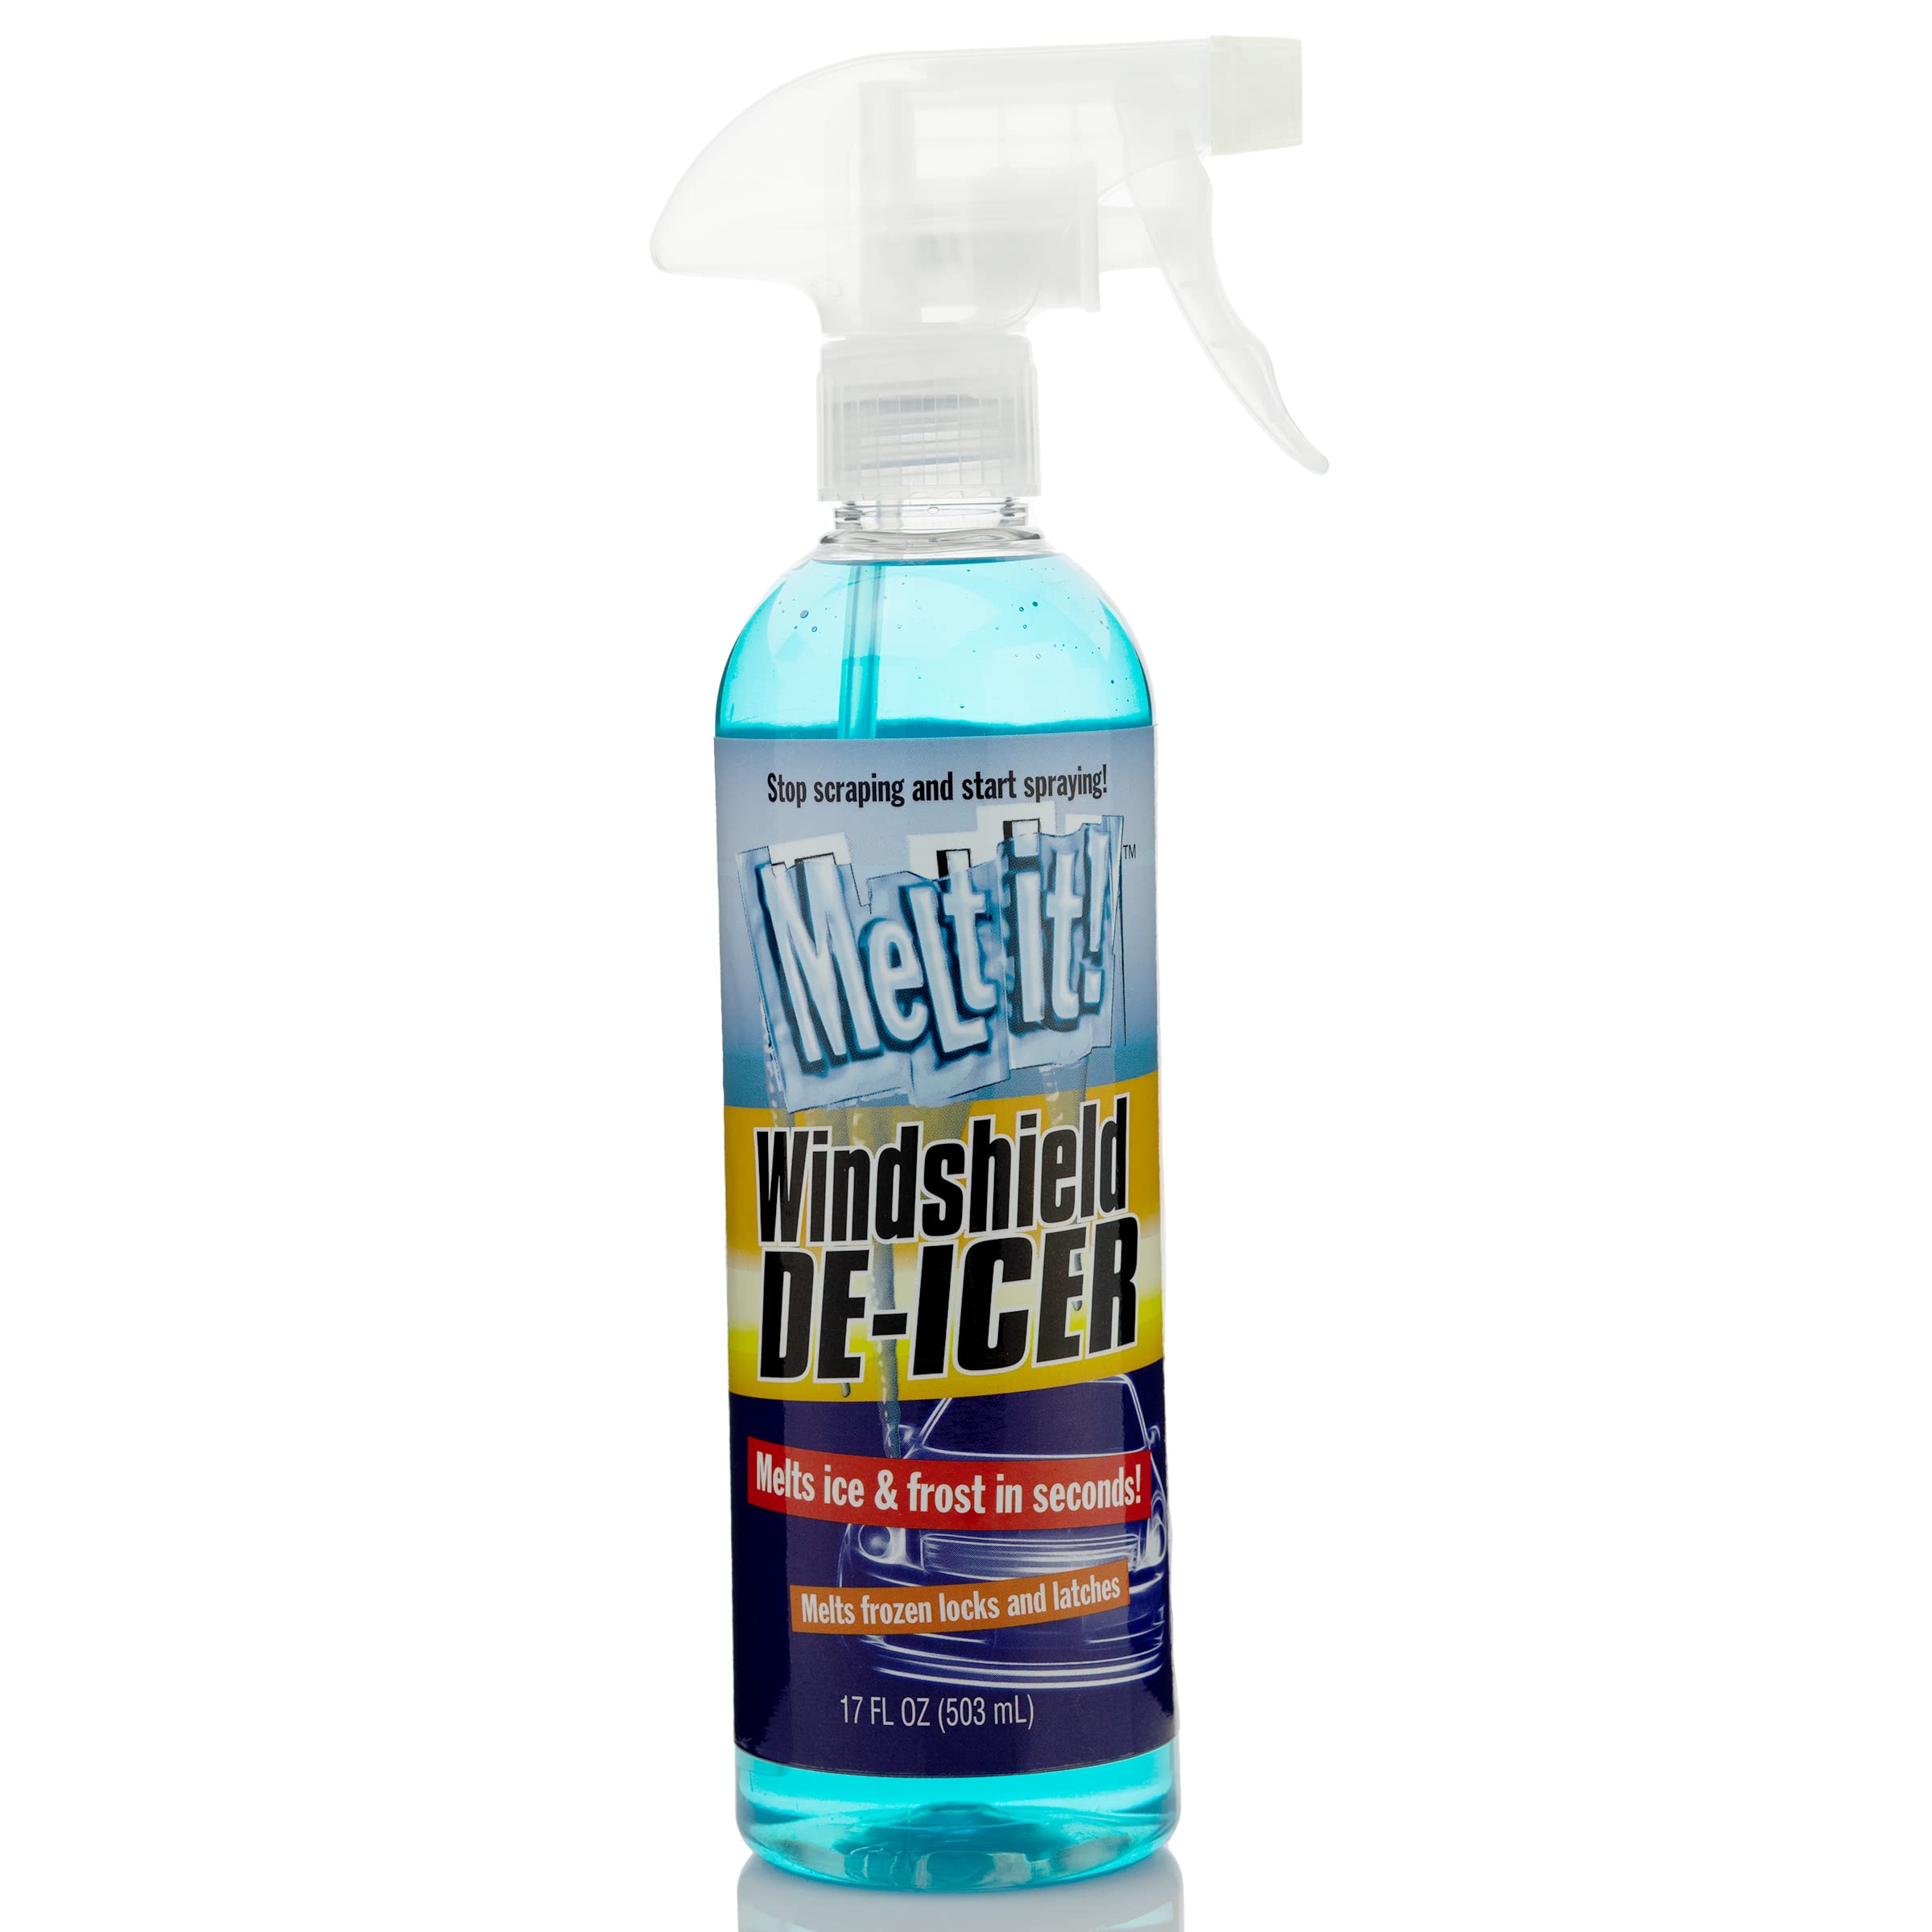 Windshield Deicer Spray Auto Windshield Deicing Spray Quickly And